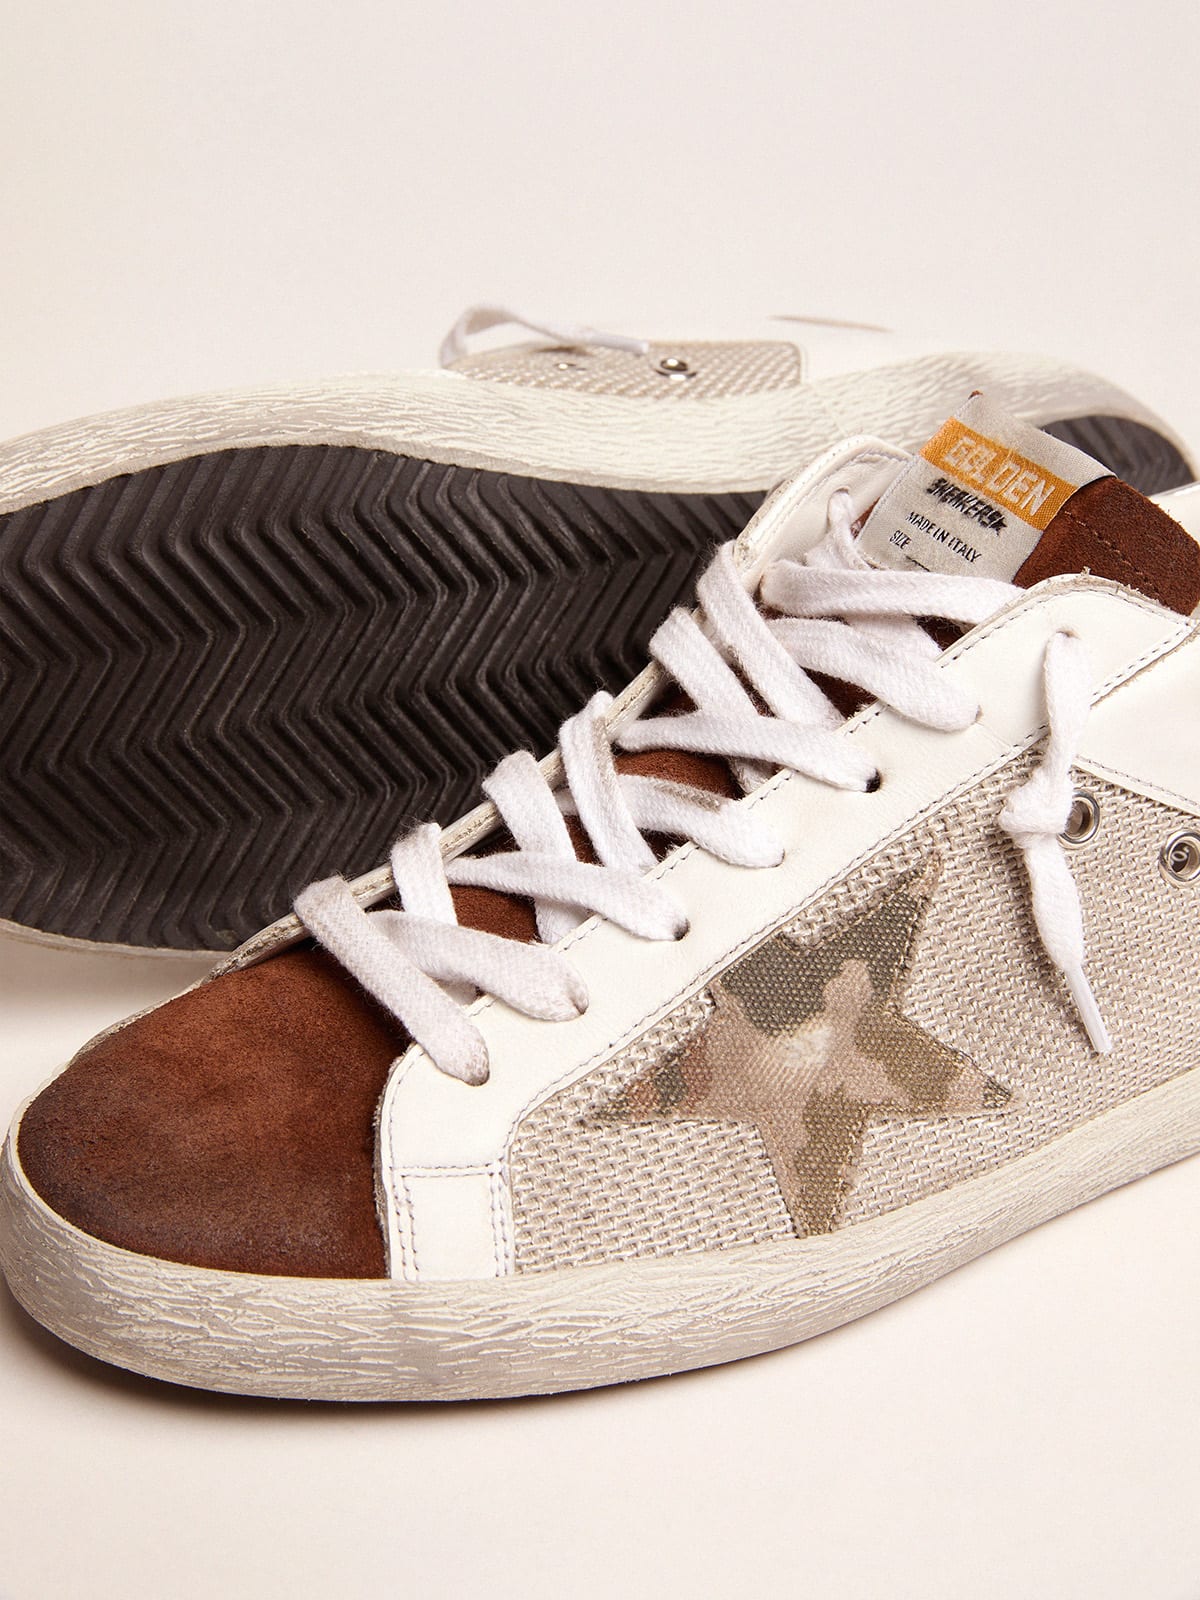 Golden Goose - Super-Star sneakers in white leather and pale silver mesh in 